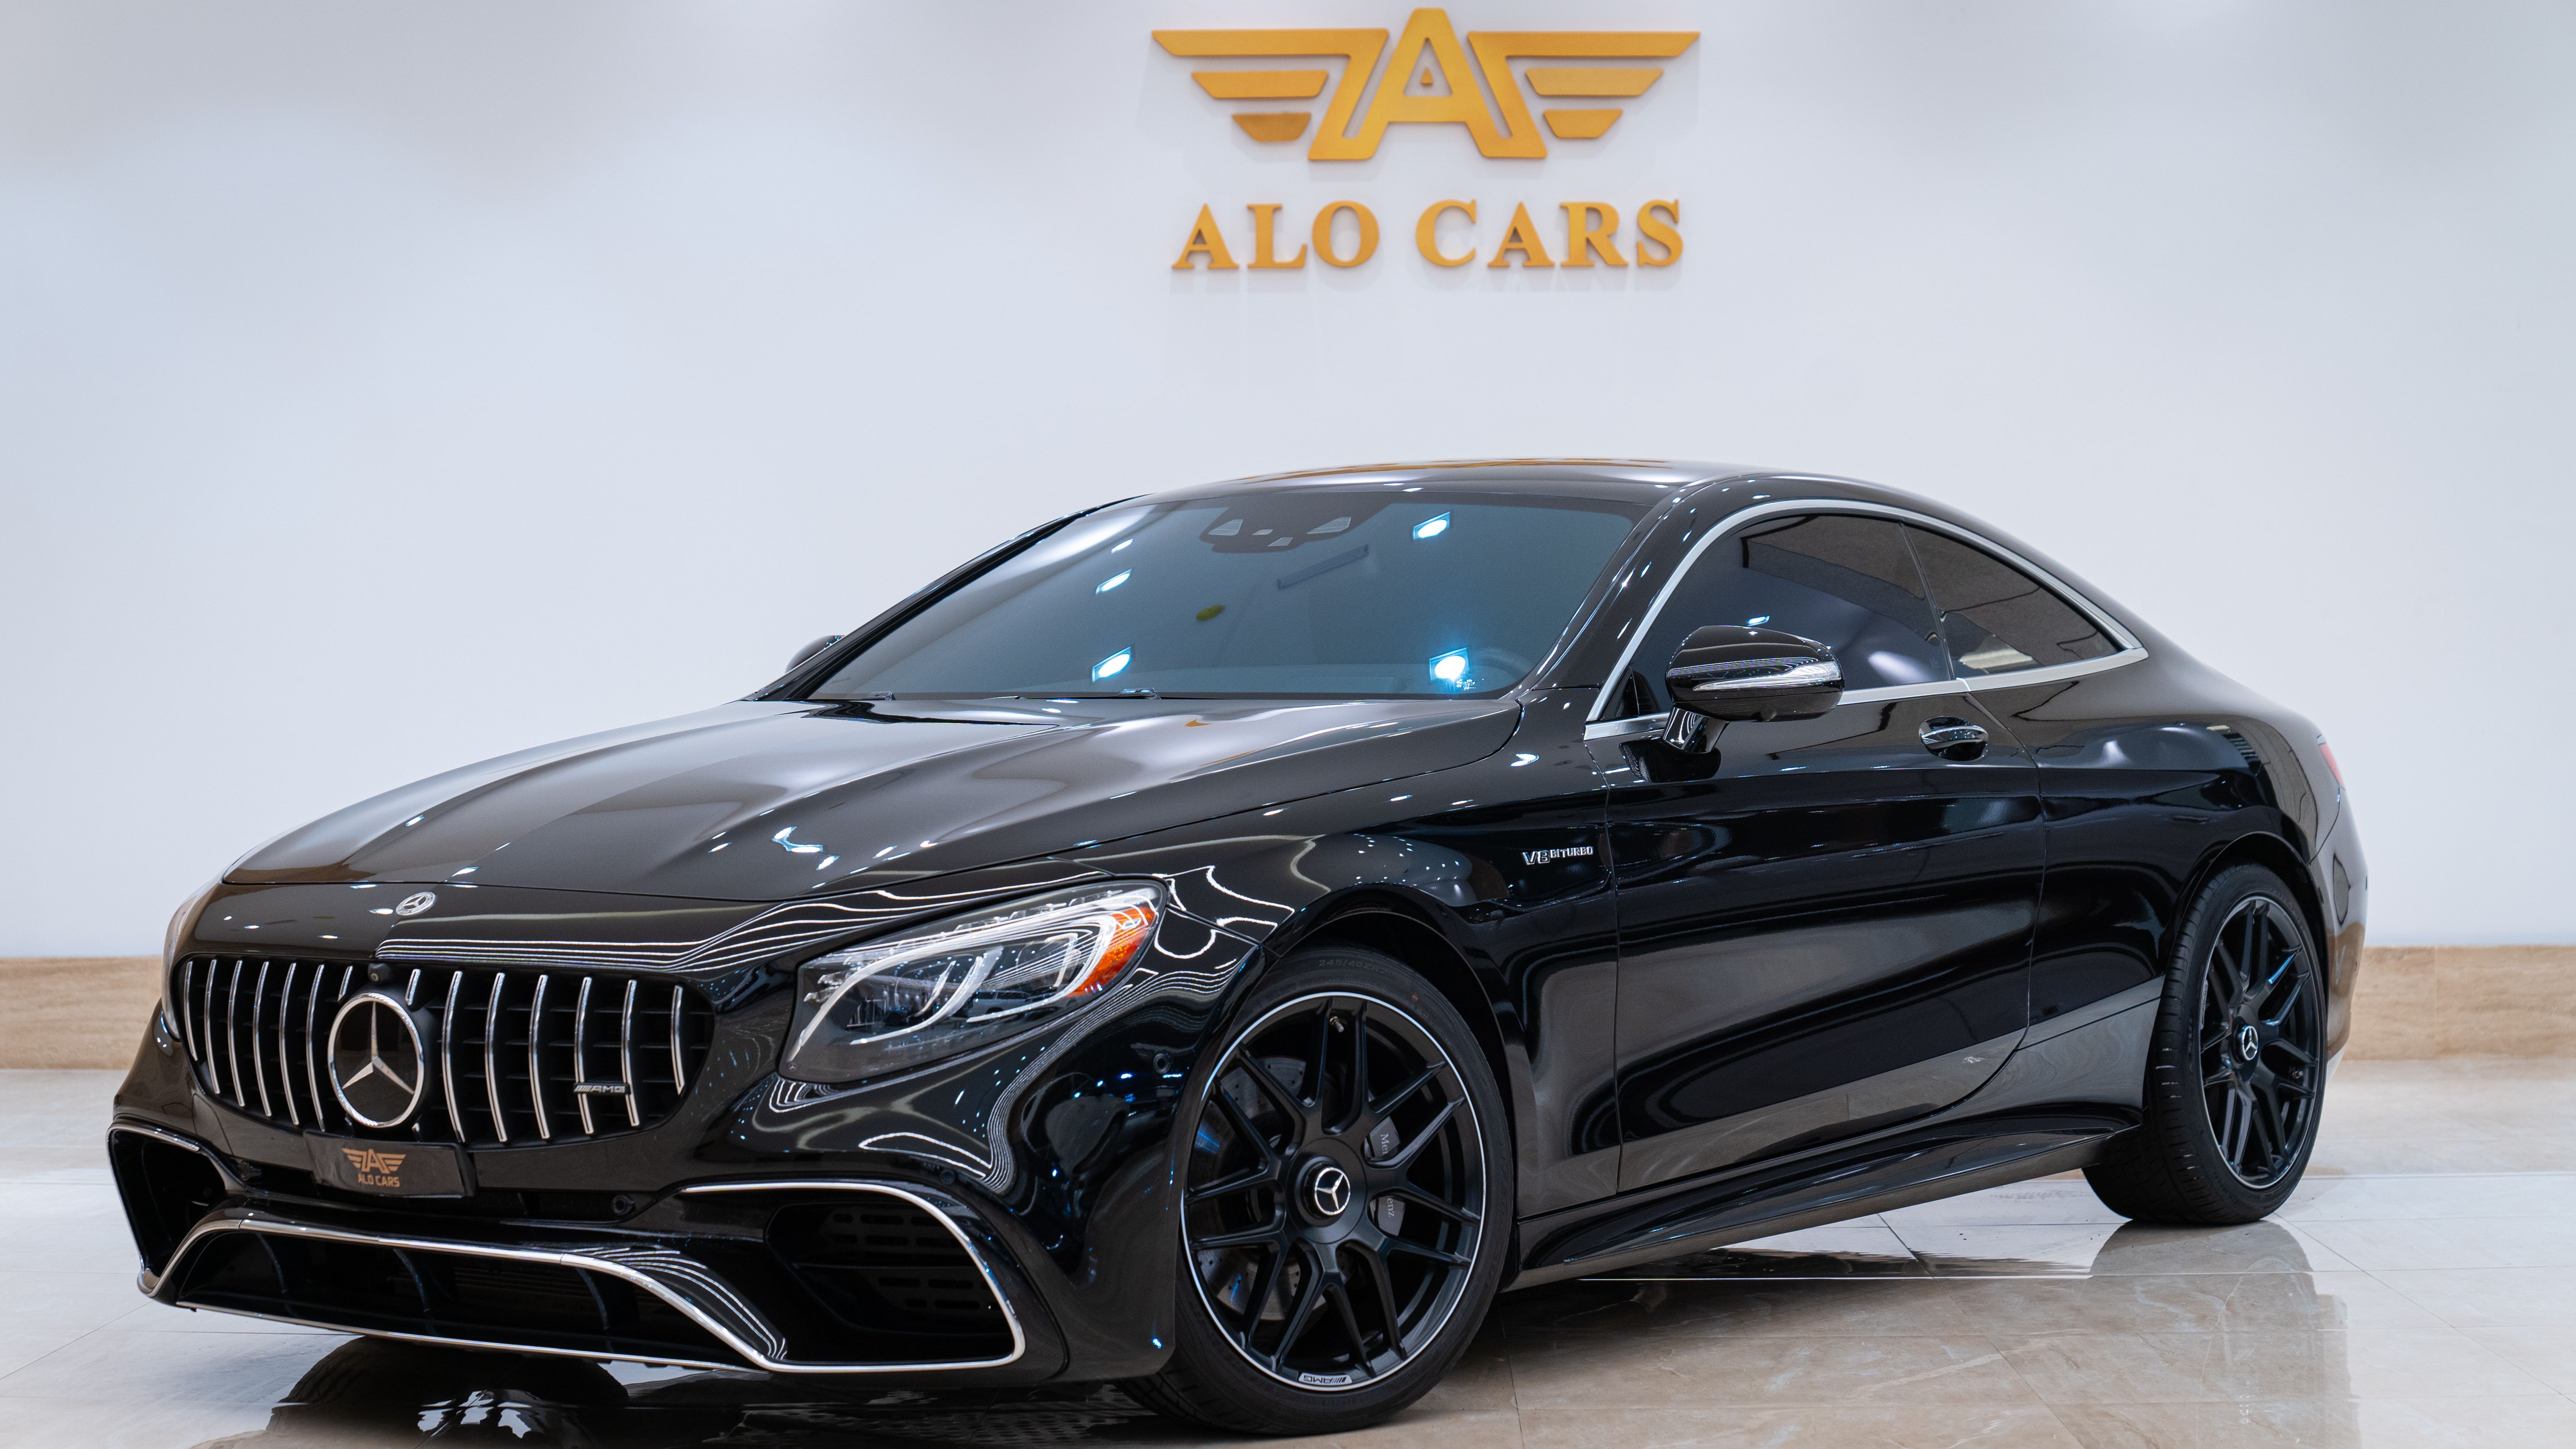 2015 MERCEDES BENZ AMG S550 WITH S63 BODYKIT / AMERICAN SPECIFICATION